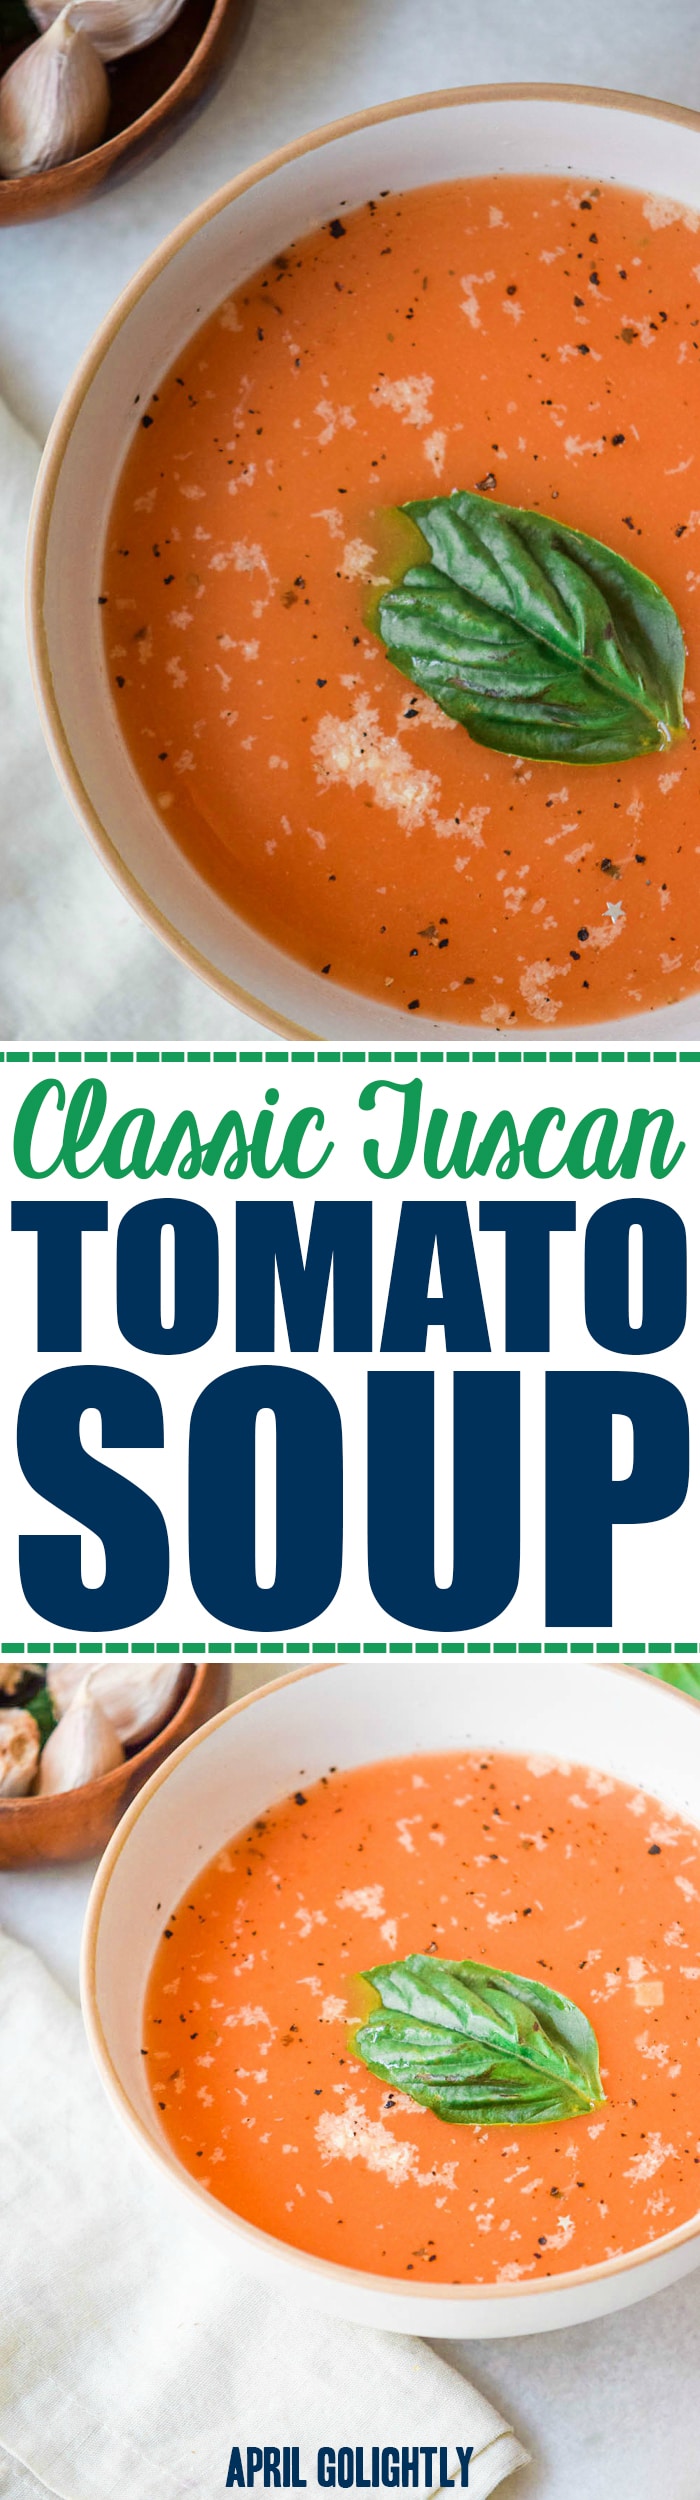 Classic Tuscan Tomato Soup Recipe made in one pot with veggies made vegan if you skip the cheese garnish on top 